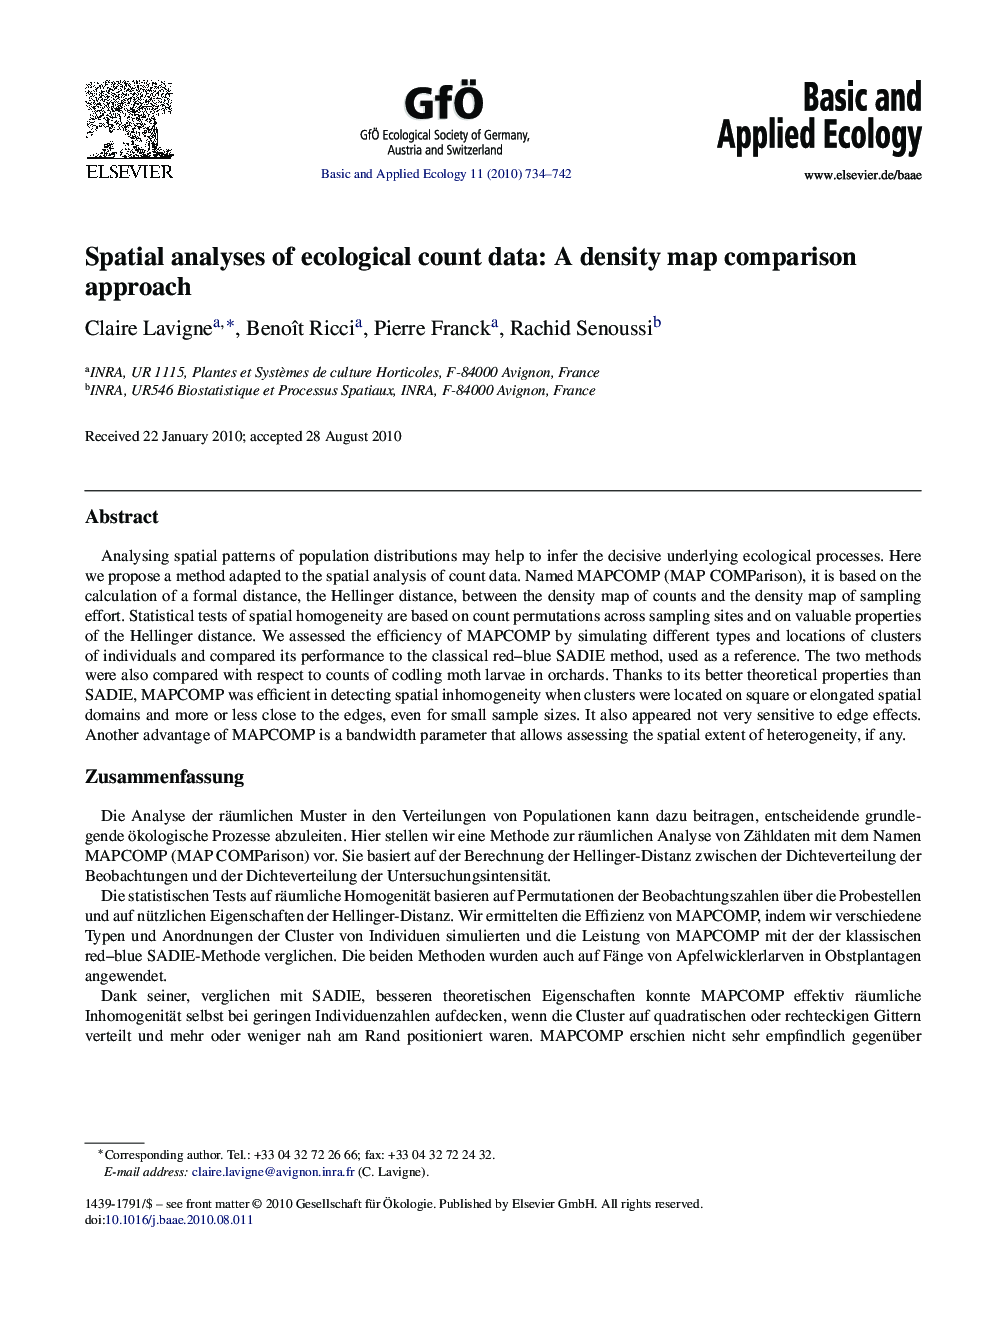 Spatial analyses of ecological count data: A density map comparison approach